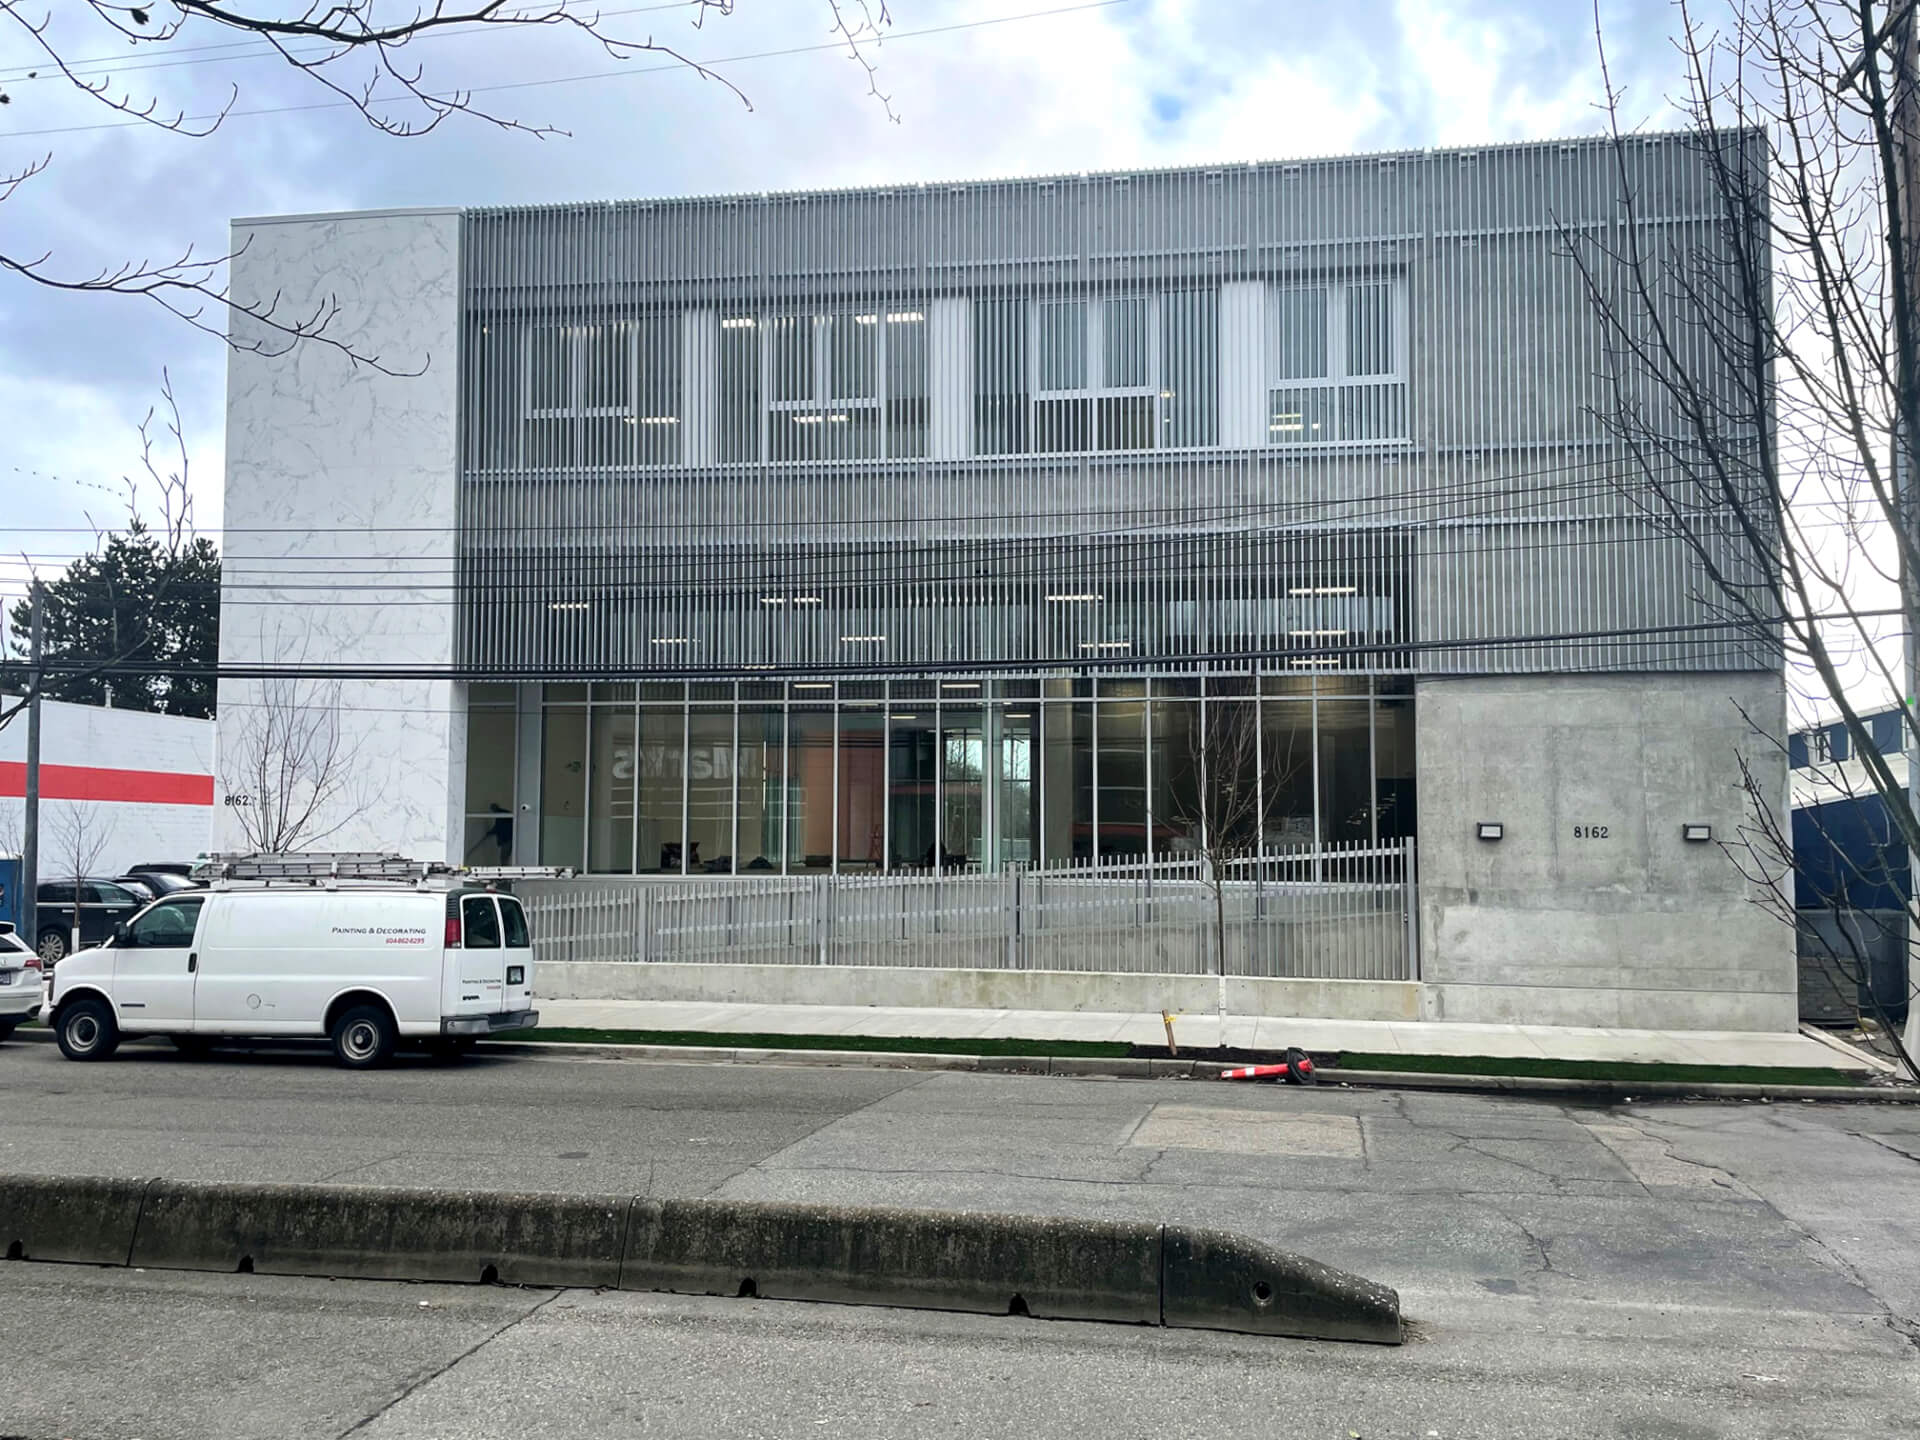 Lee & Associates Negotiates 10-Year Lease of a New State-of-the-Art Industrial Building in South Vancouver